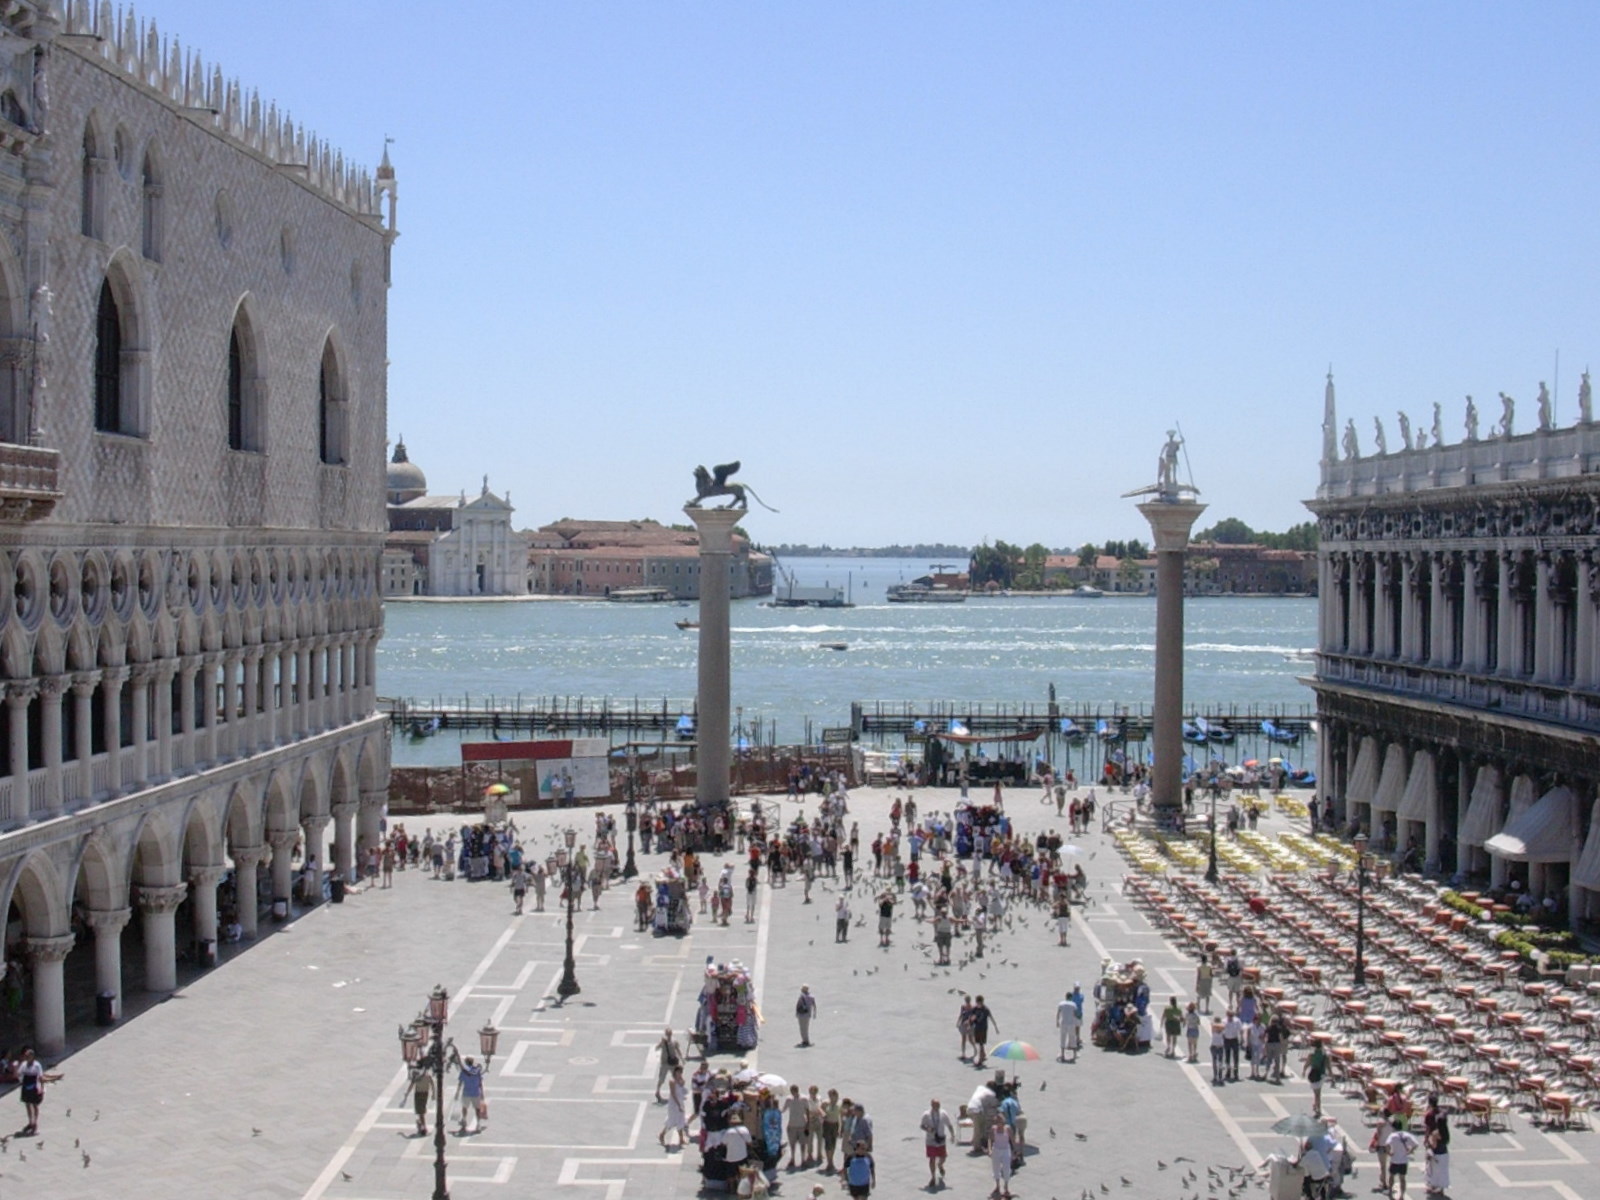 The Piazzetta di San Marco with the two columns in their centuries-old setting.